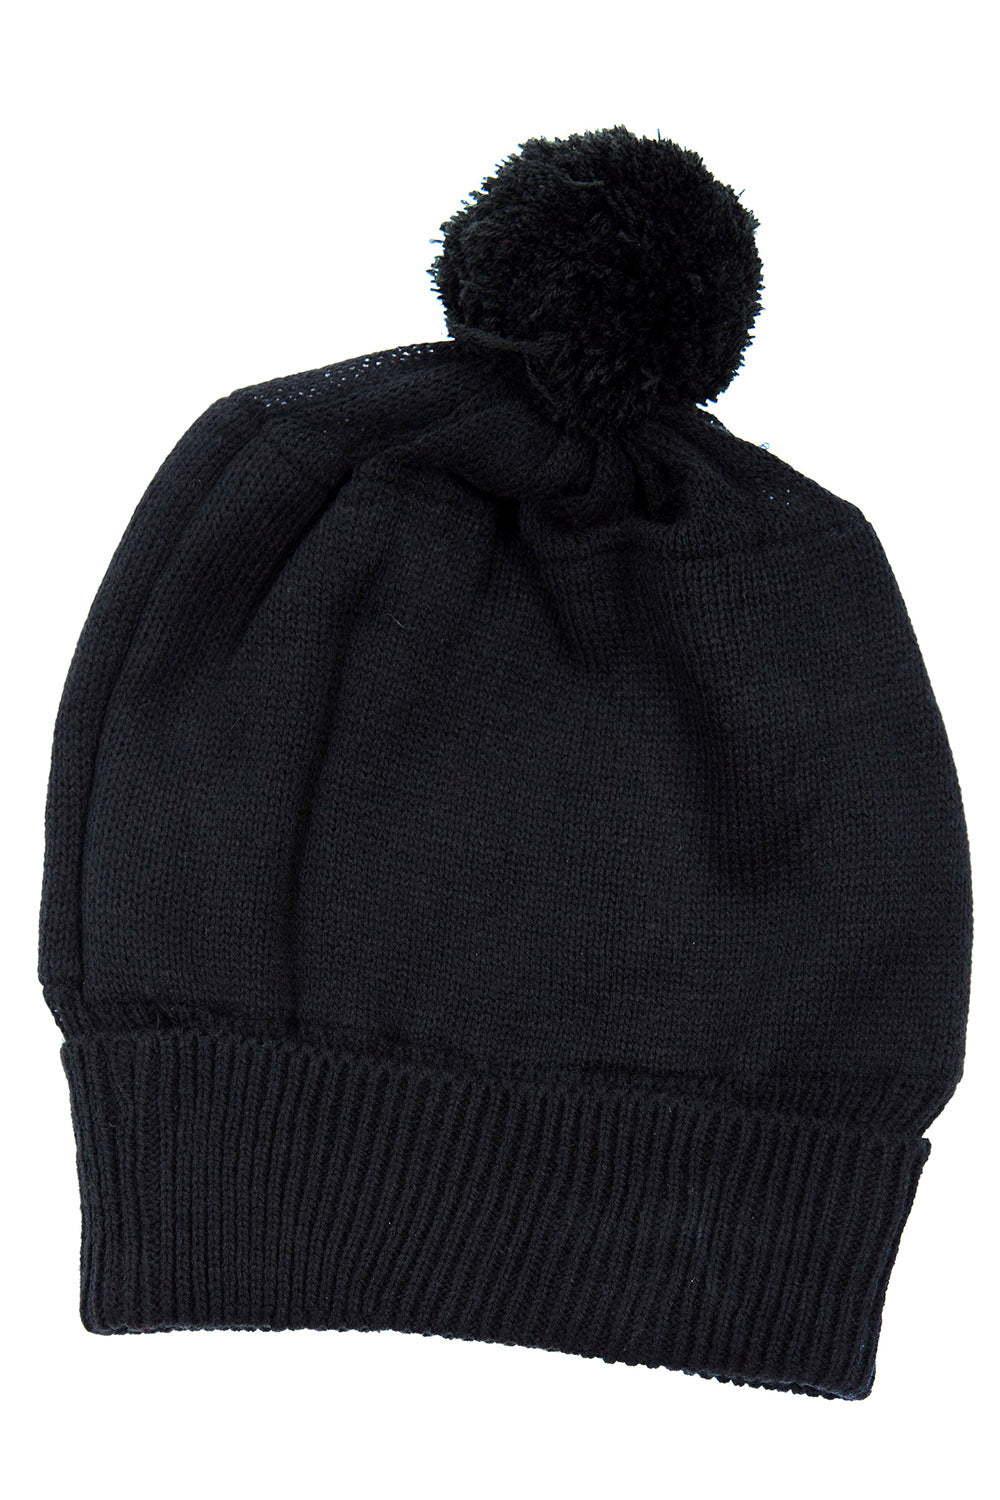 mens winter knitted beanie